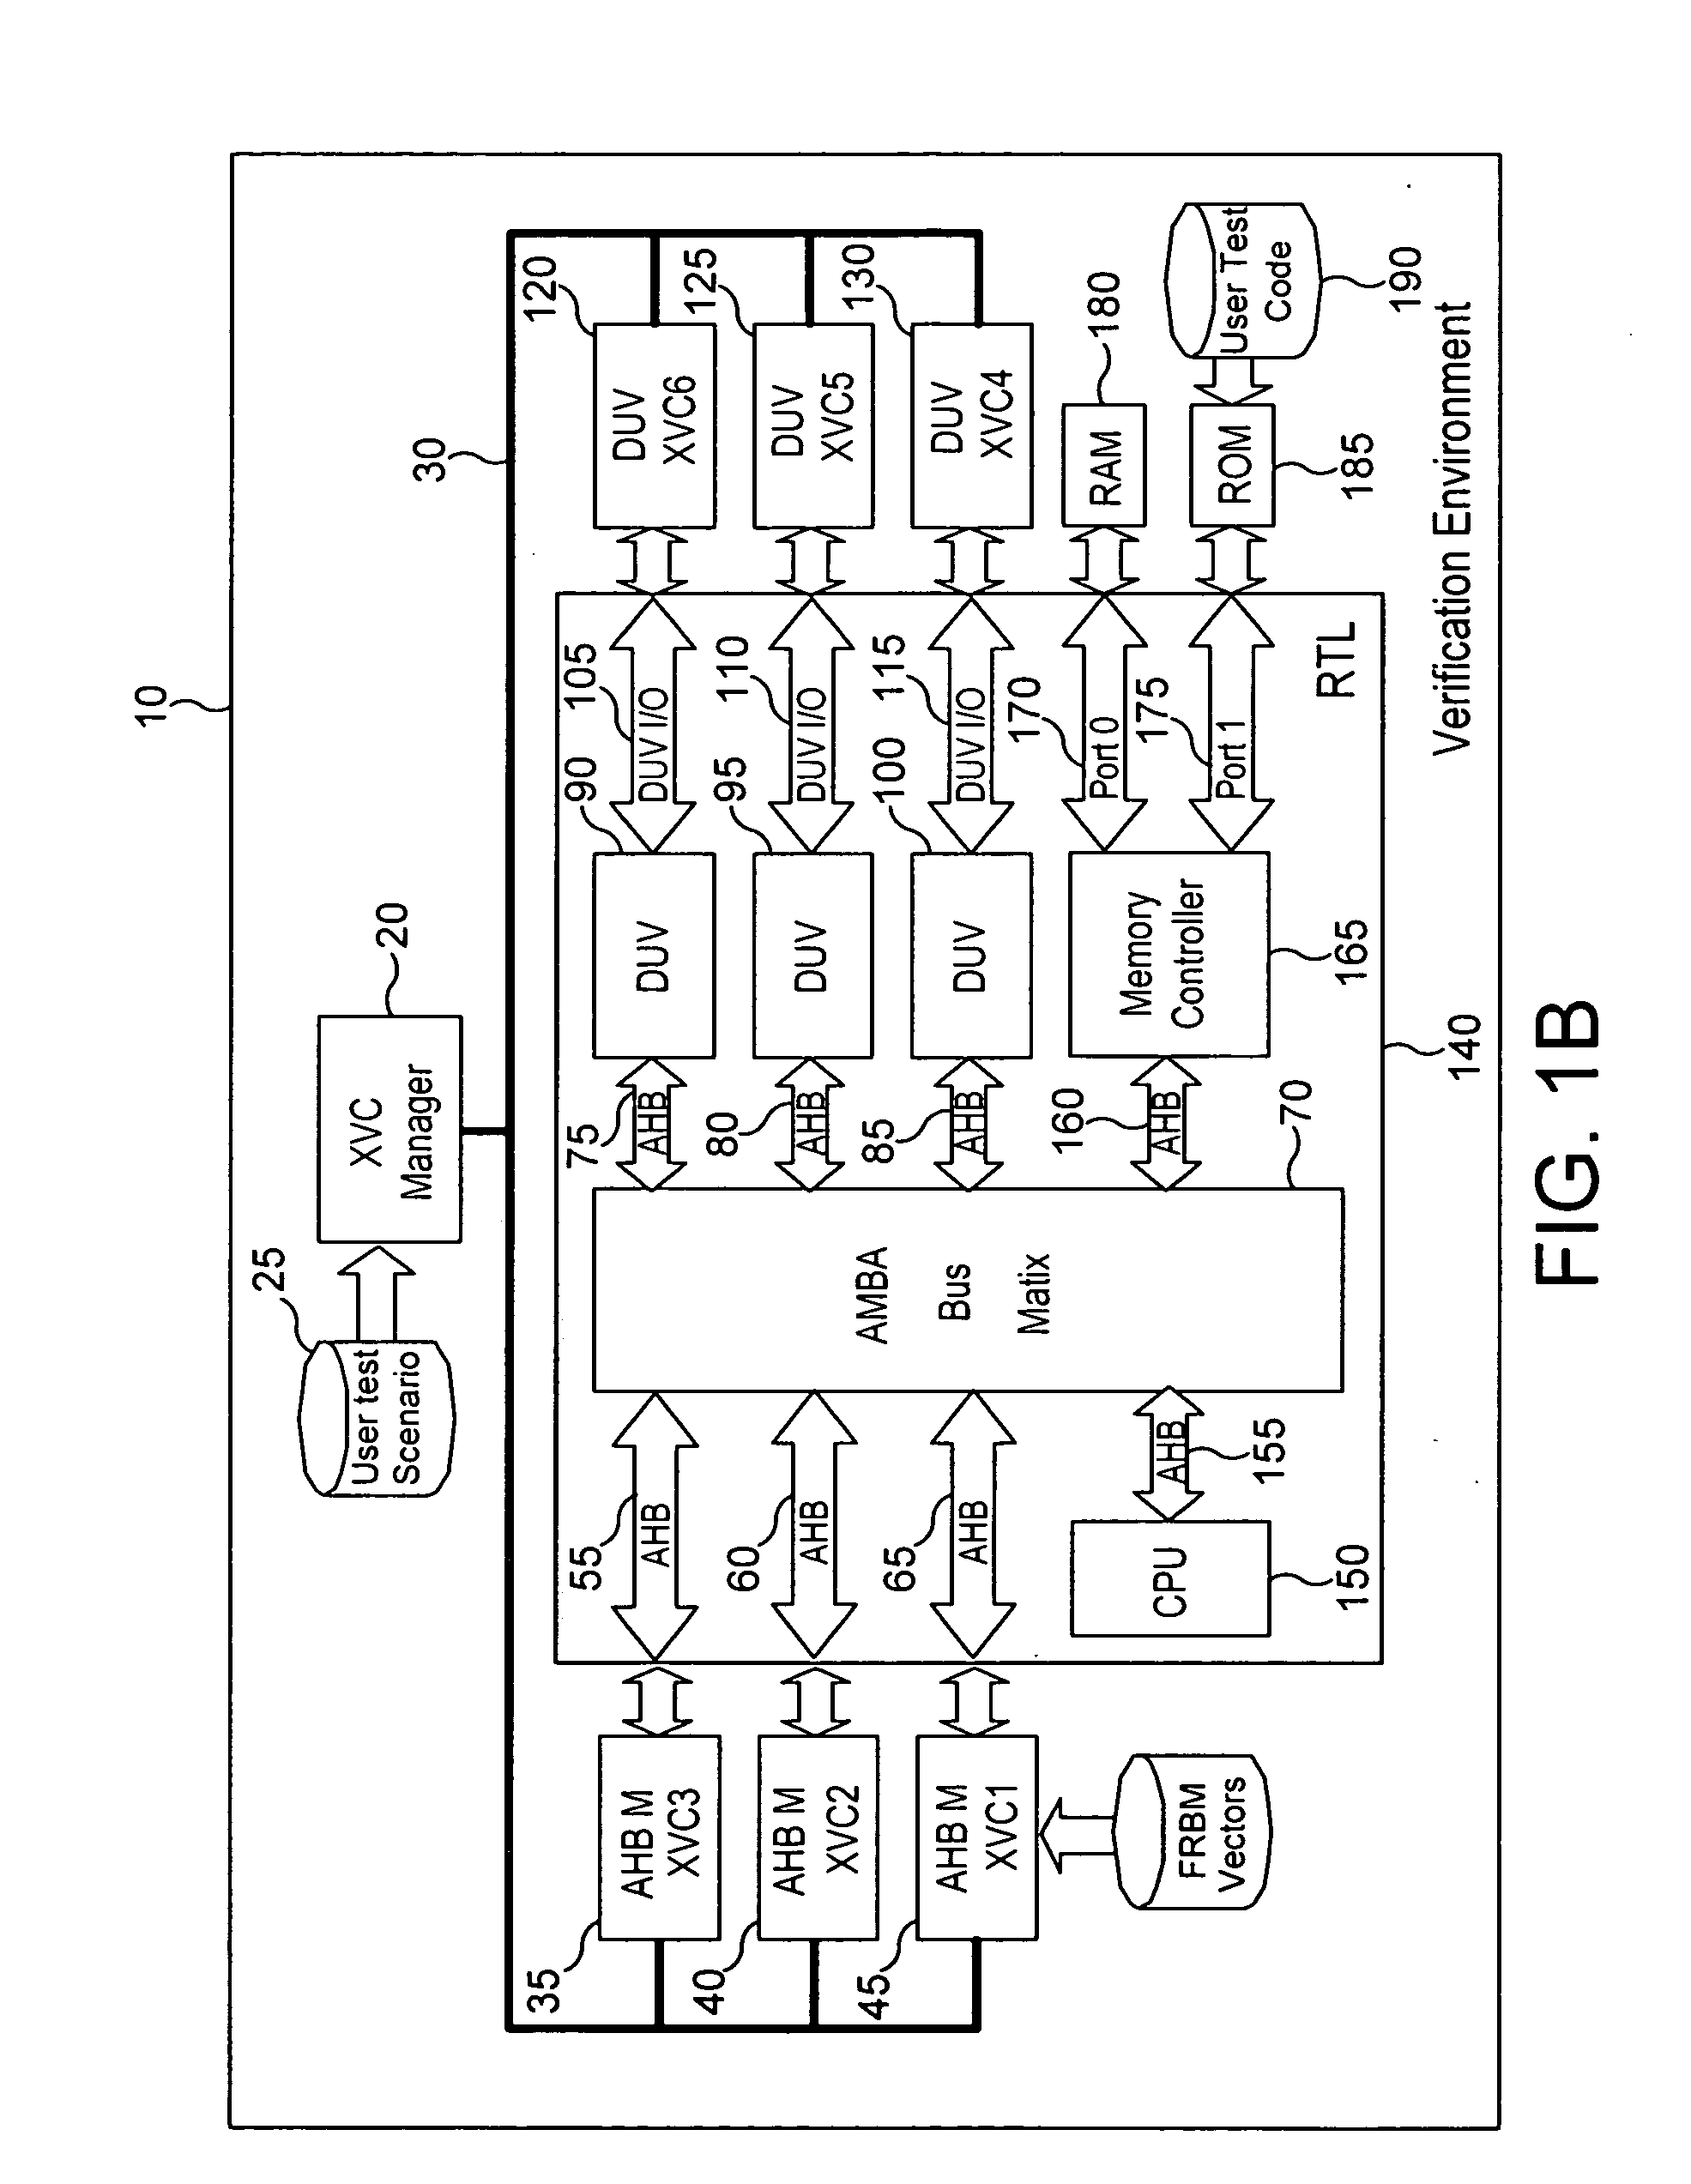 Apparatus and method for performing hardware and software co-verification testing